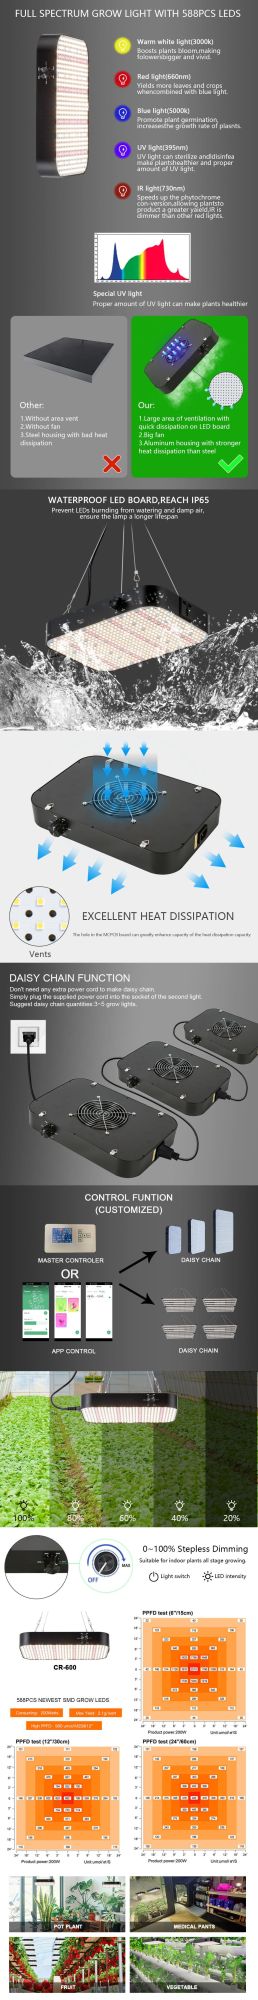 2022 Newest Ideal Full Spectrum Plant Grow Light for Indoor Plants, 2X2 FT Coverage Growing Lamps Cr600 with 588PCS LEDs & Double Driver for Seedling Veg Flower